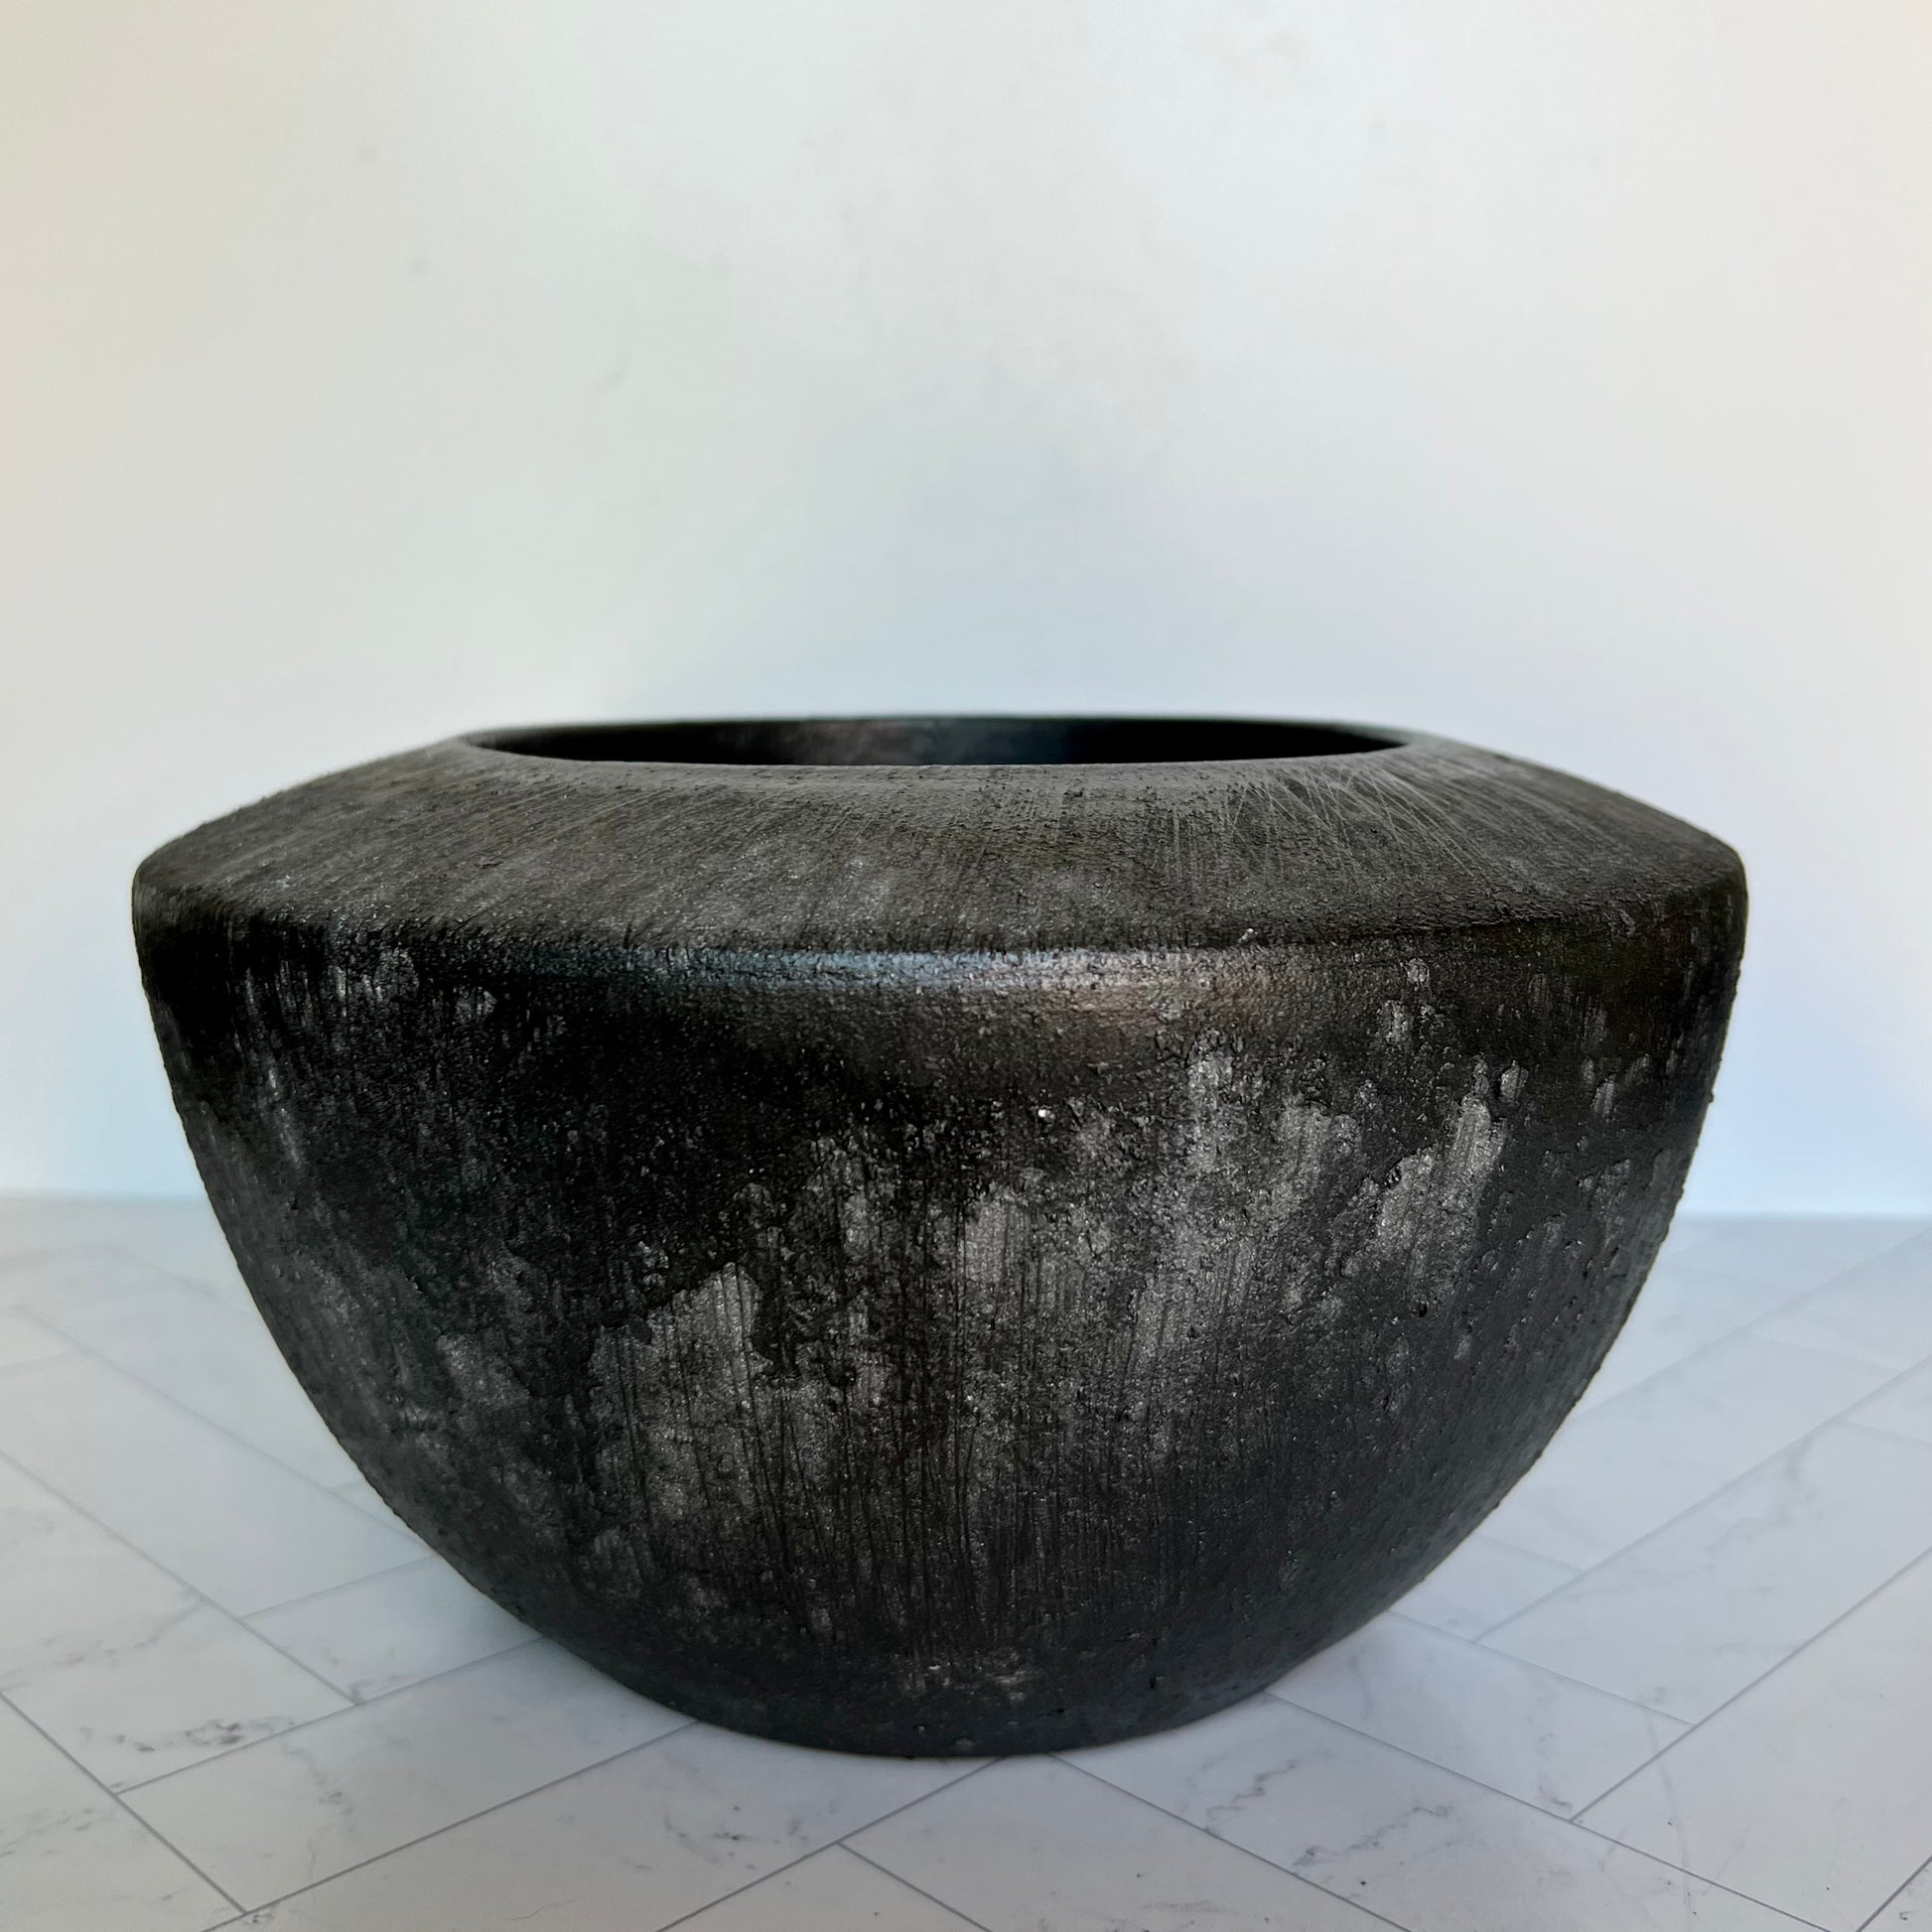 A black/gray planter on a white surface